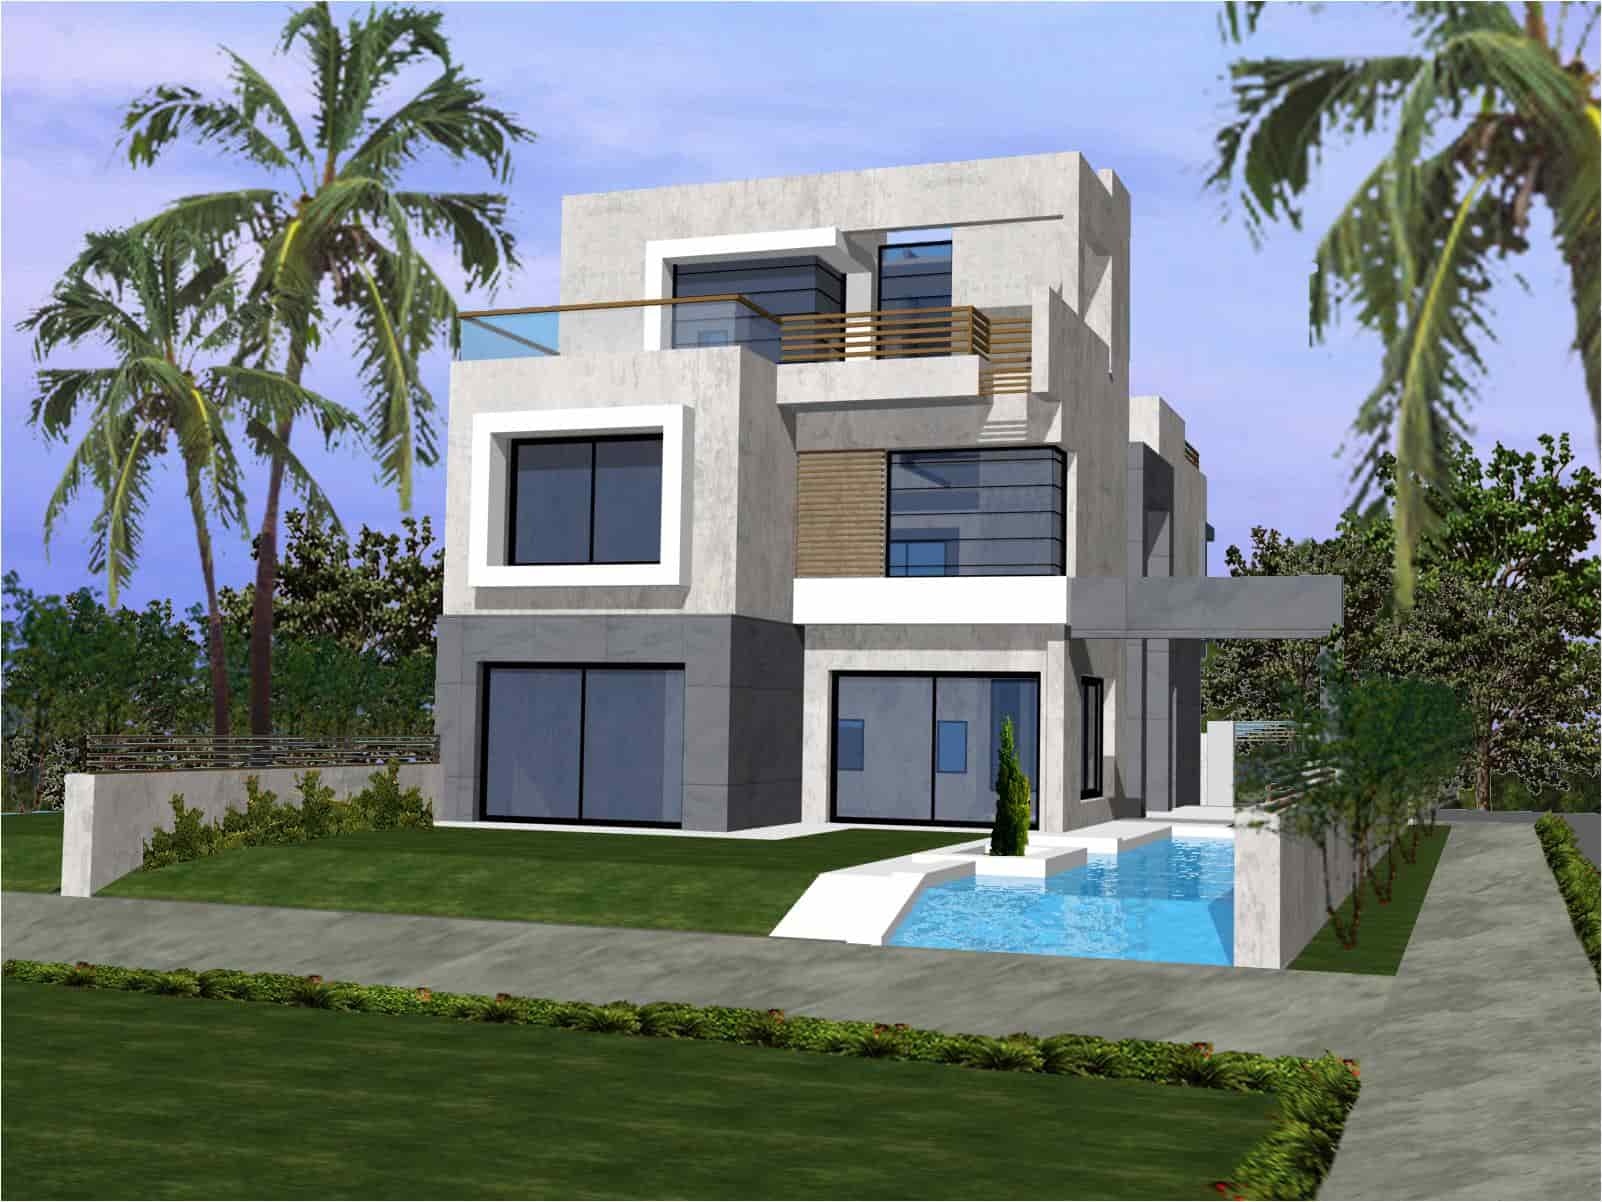 Excellent offer Villa 380 meters for sale in Village Gardens Katameya in a great location